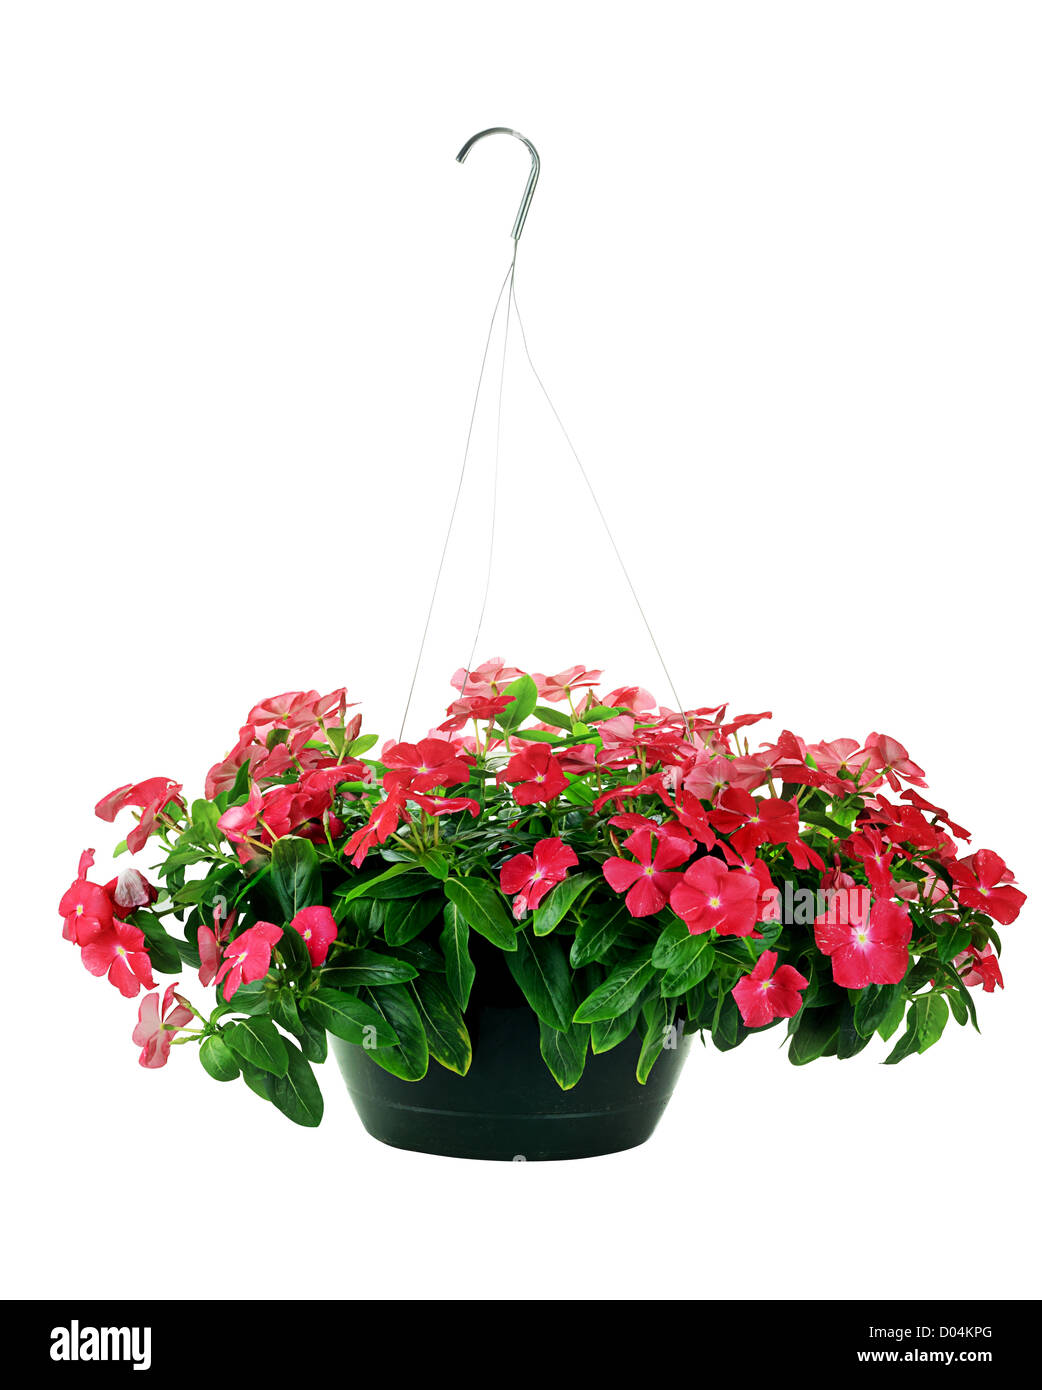 Hanging Basket with Impatiens flowers isolated over a white background with clipping path included. Stock Photo